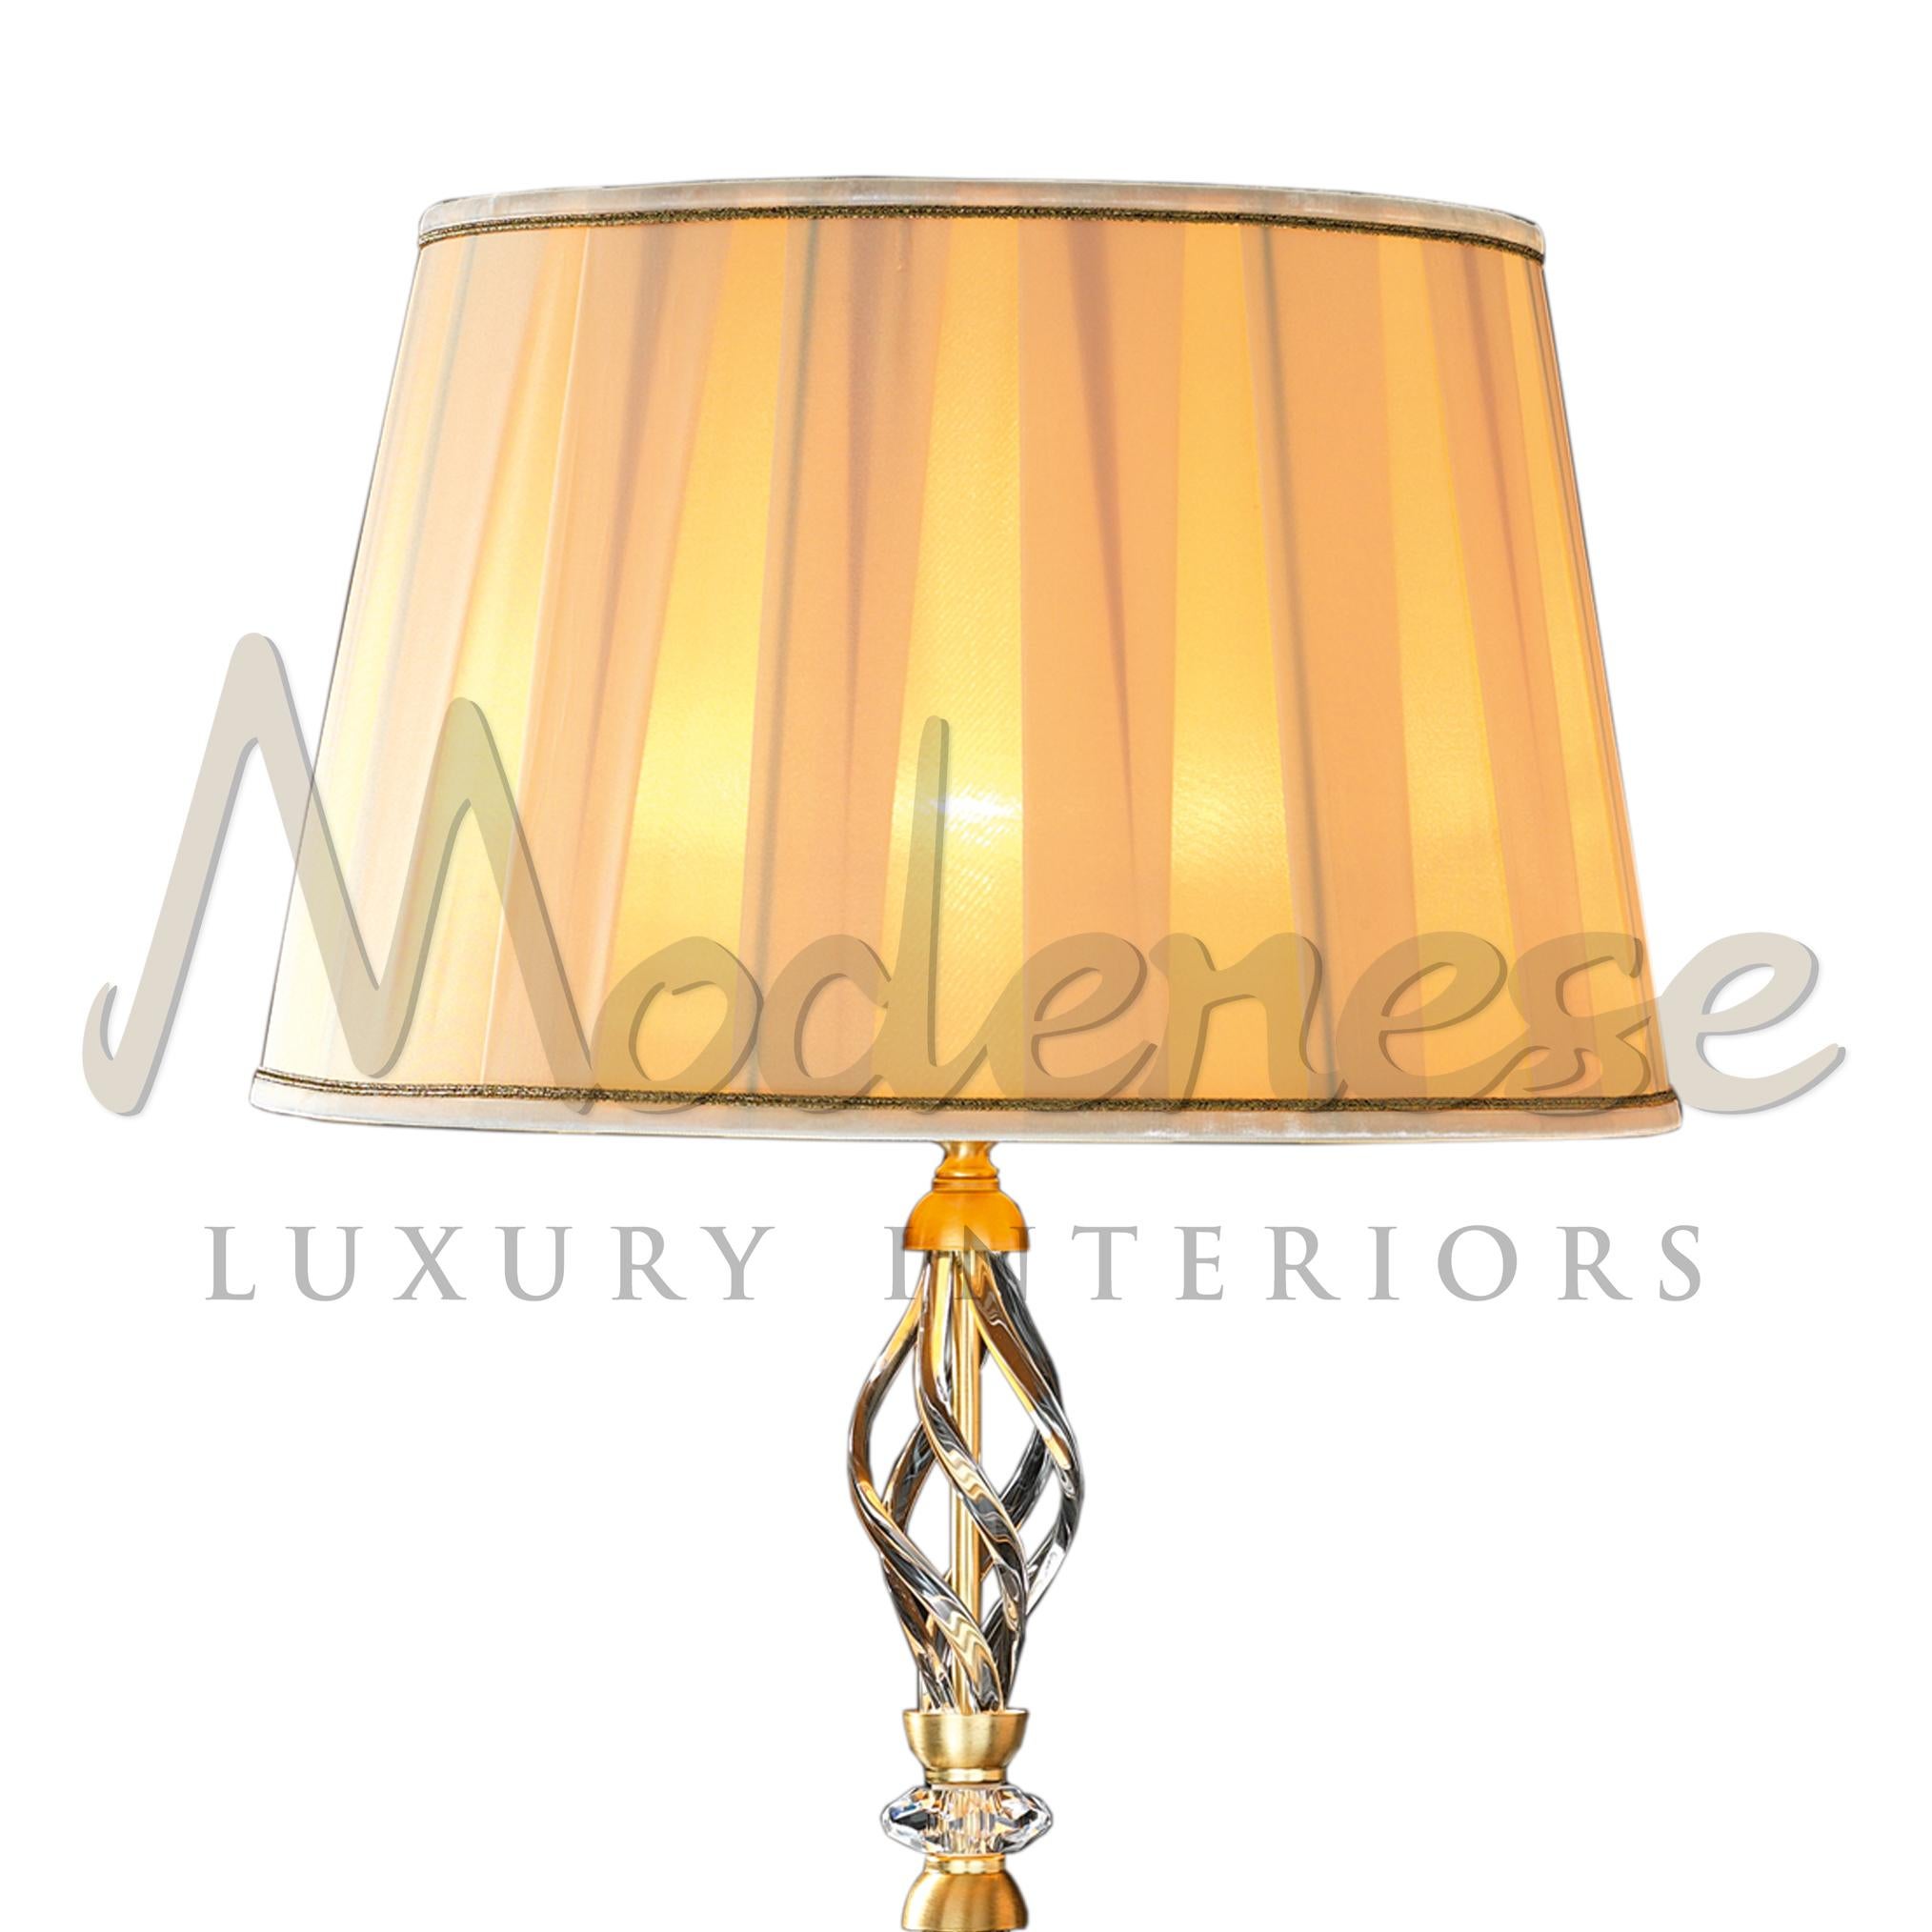 Have yourself be seduced by this combination of timeless classic elements: elegant brass base, adorned with sparkling transparent crystals, gold satin finish and exquisite fabric lampshade by Modenese Luxury Interiors. This model requires 1 single